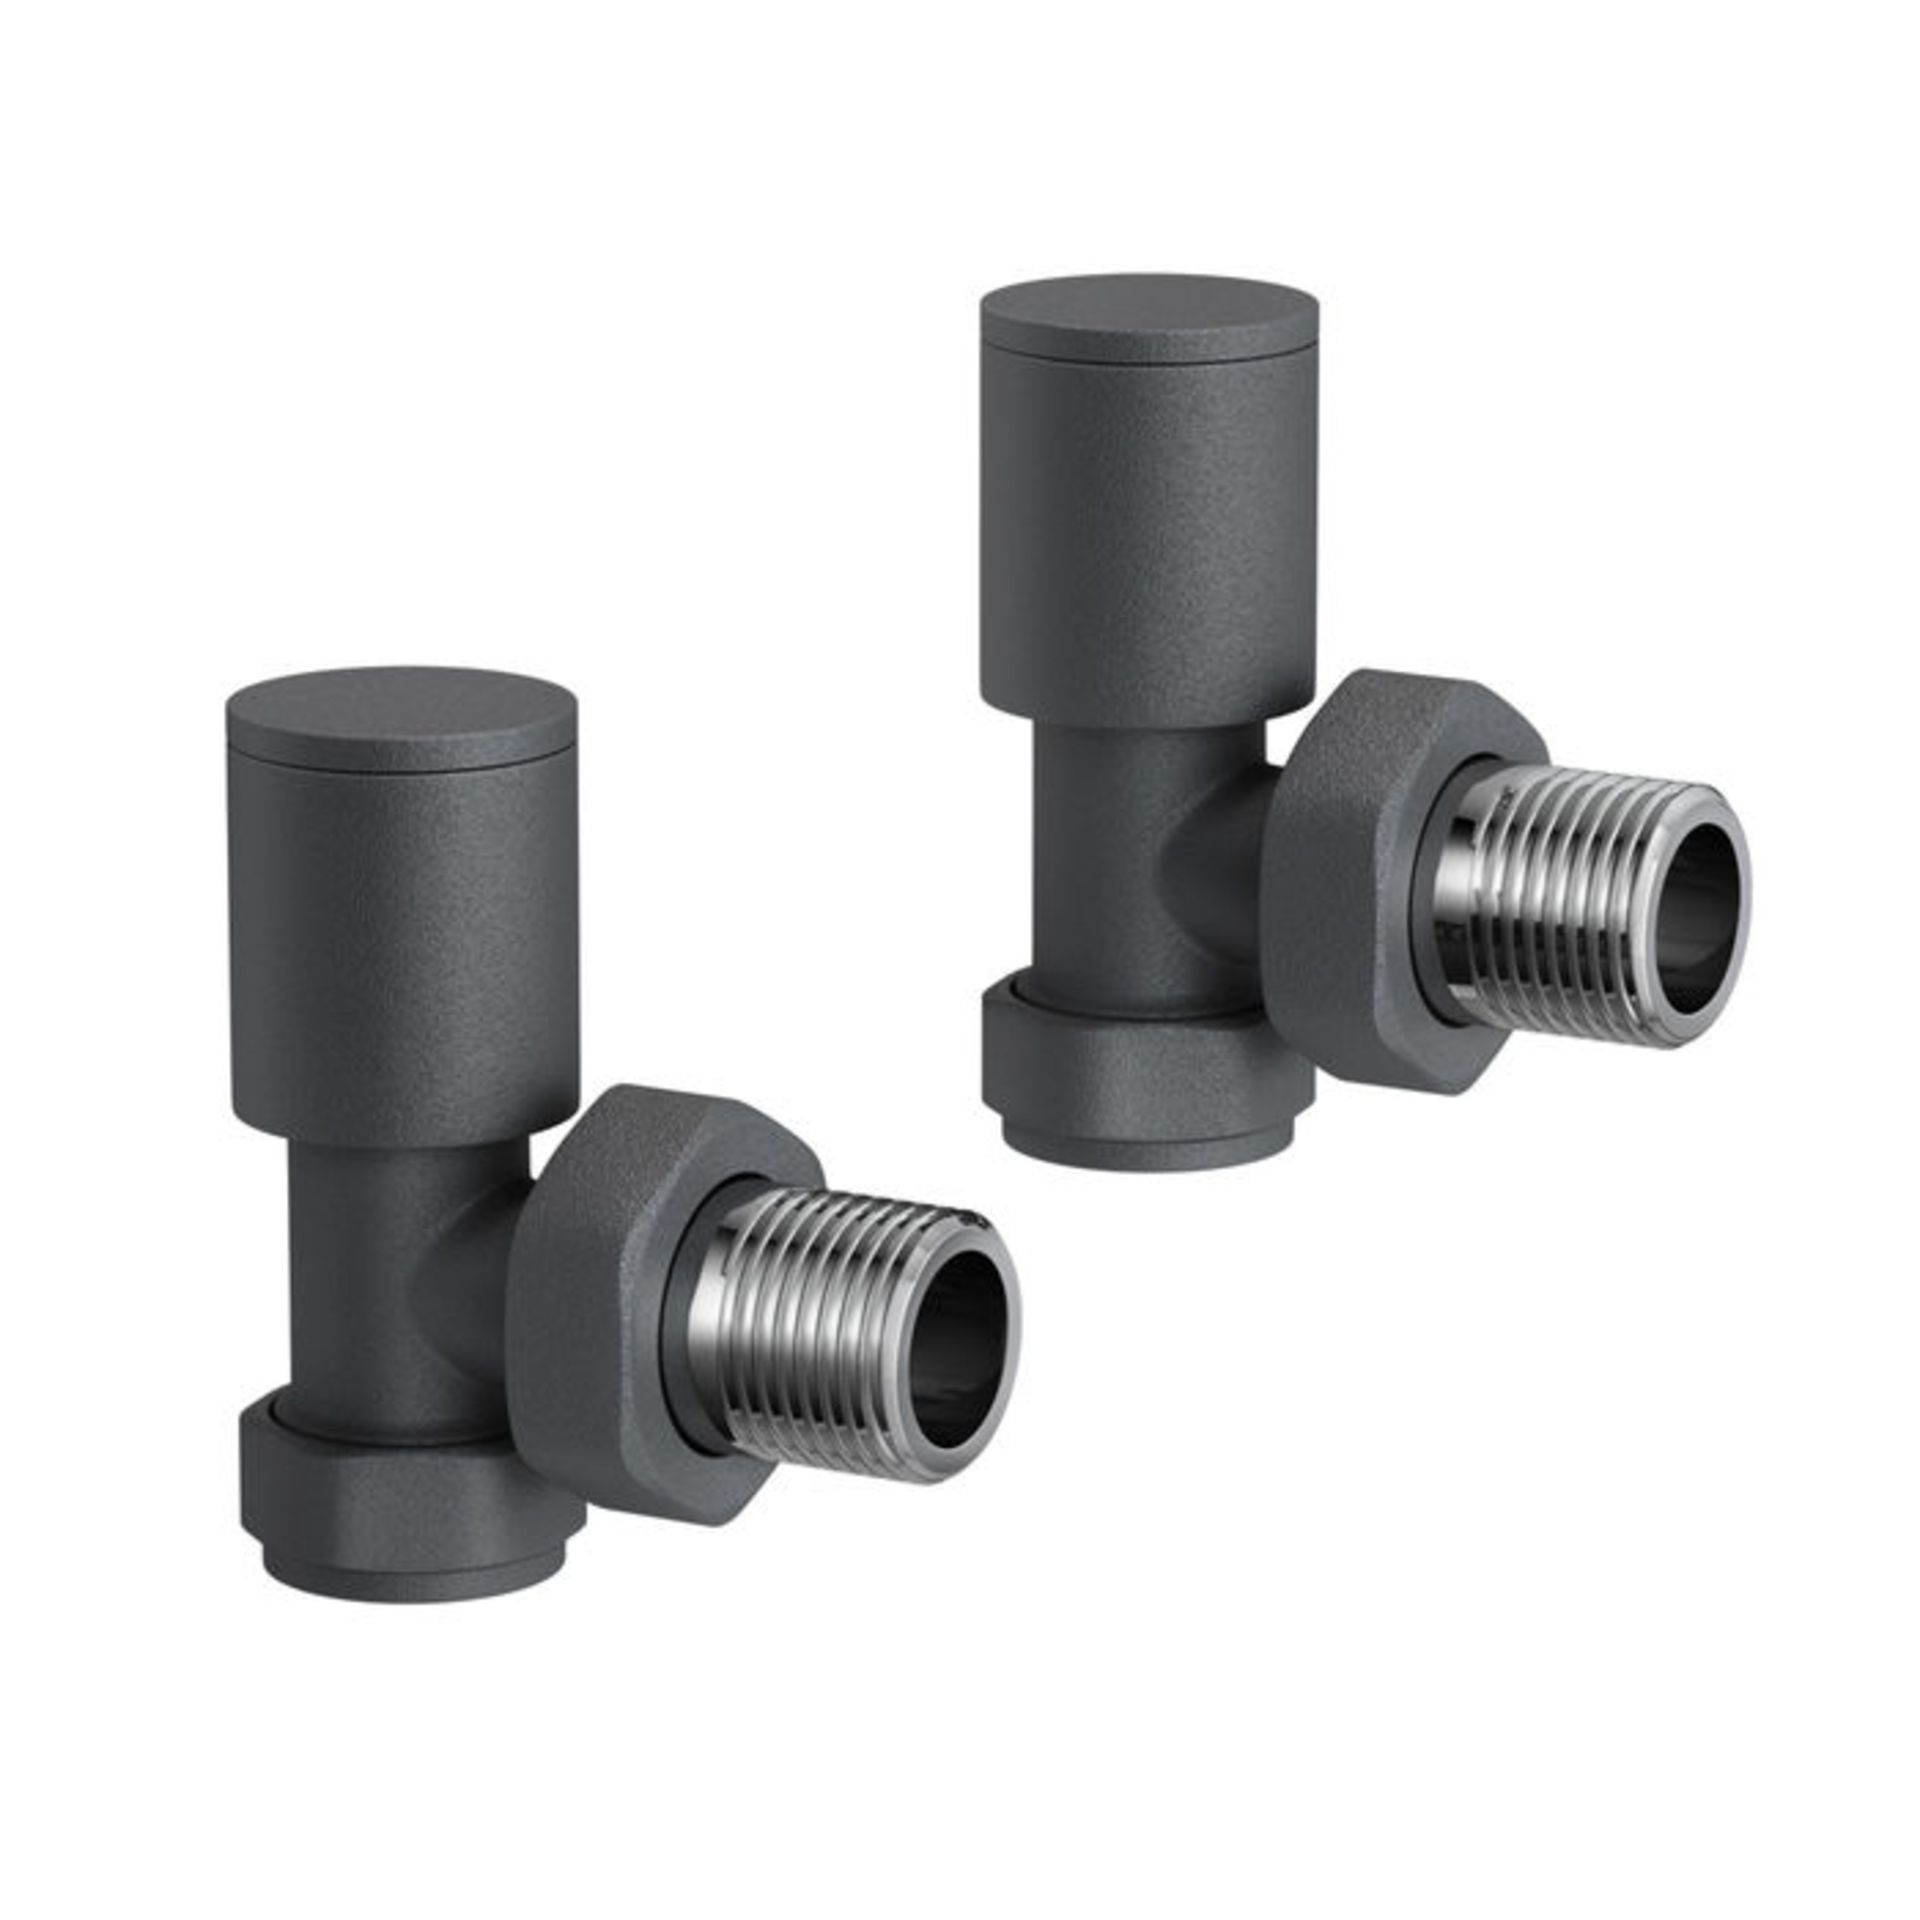 (PO159) Anthracite Standard Connection Angled Radiator Valves 15mmContemporary anthracite